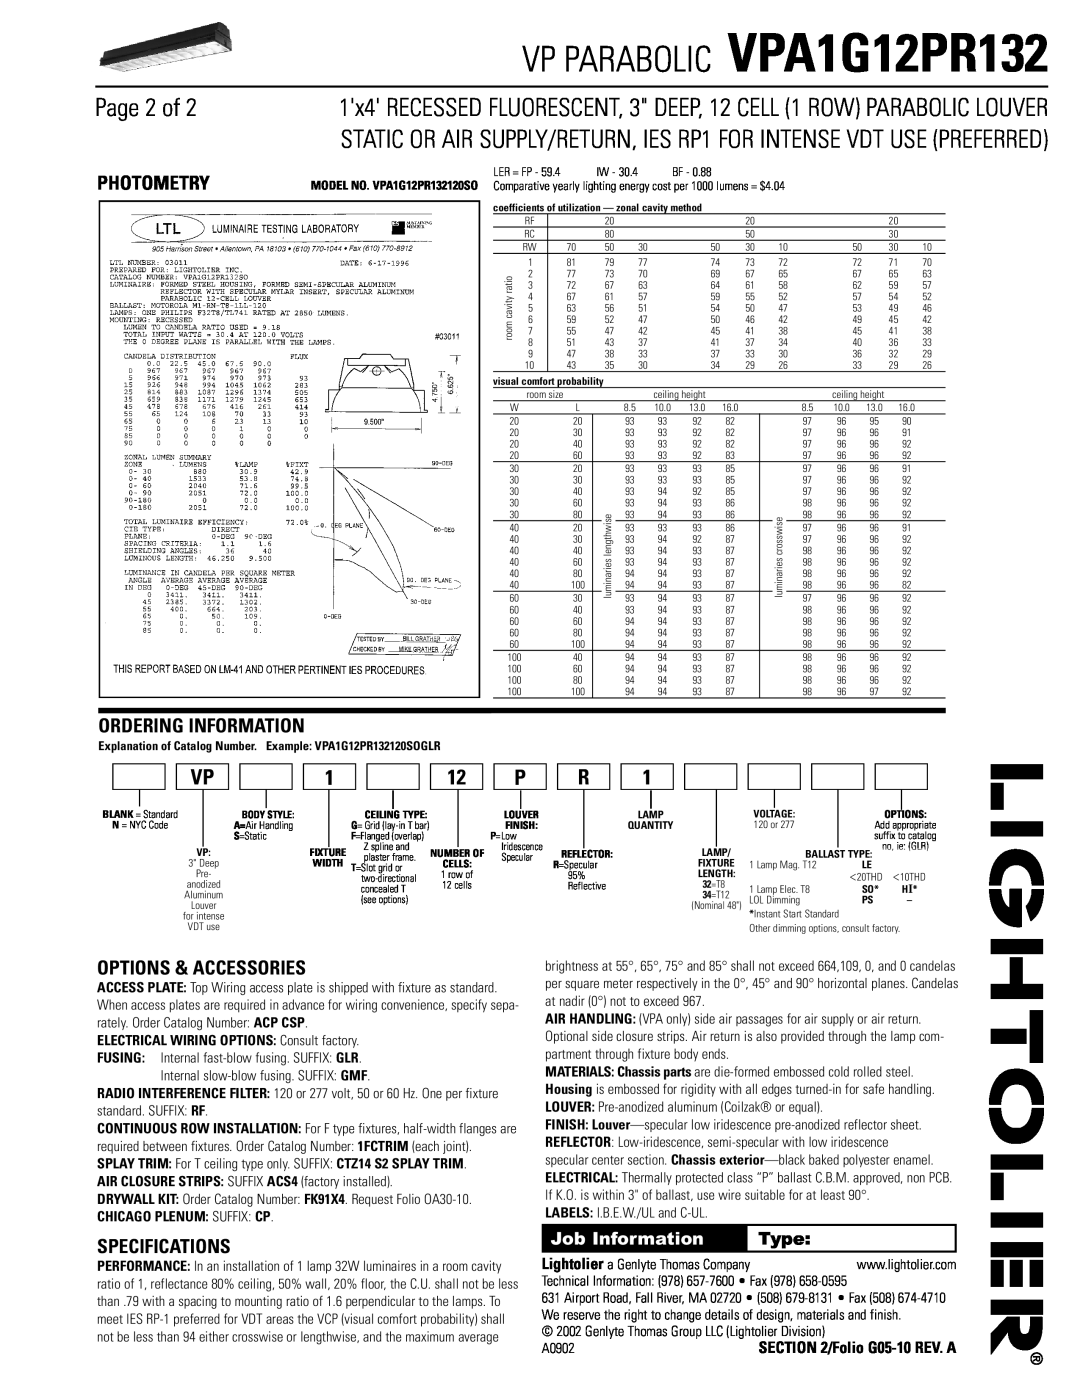 Lightolier VPA1G12PR132 dimensions Page 2 of, Photometry, Ordering Information, Options & Accessories, Specifications, Type 